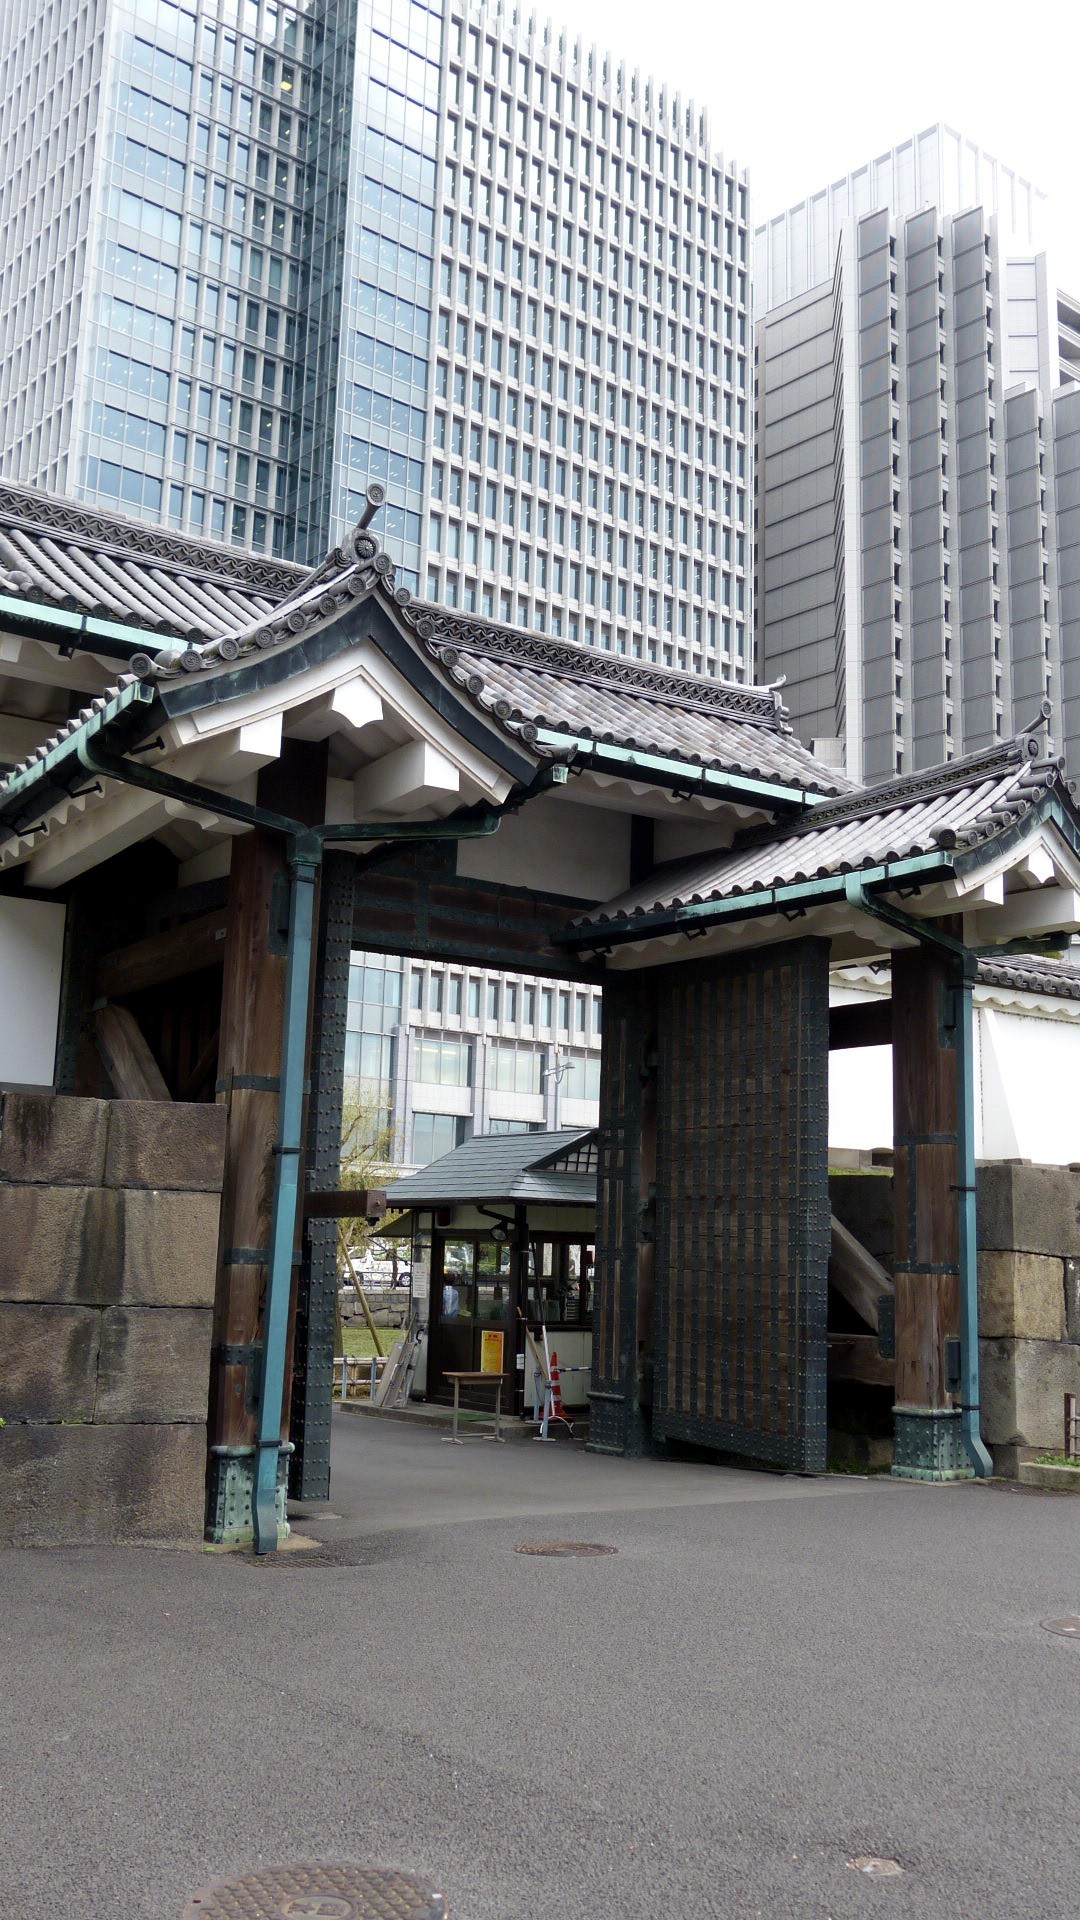 exterior of the entrance with traditional tiled roofing and stonework with modern skyscrapers in the background